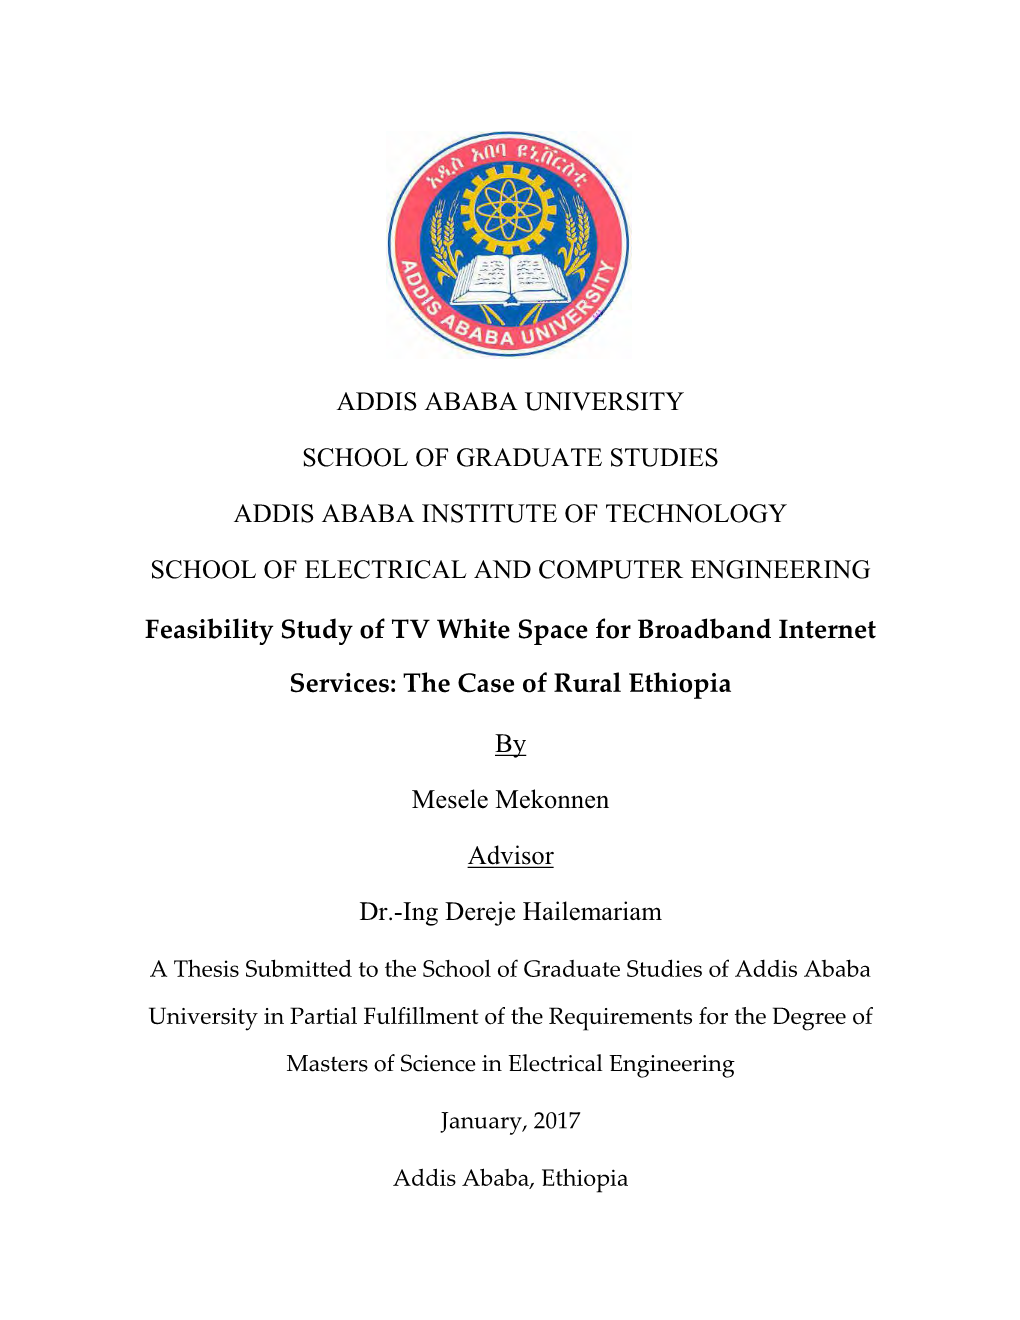 Feasibility Study of TV White Space for Broadband Internet Services in Rural Ethiopia Page Ii